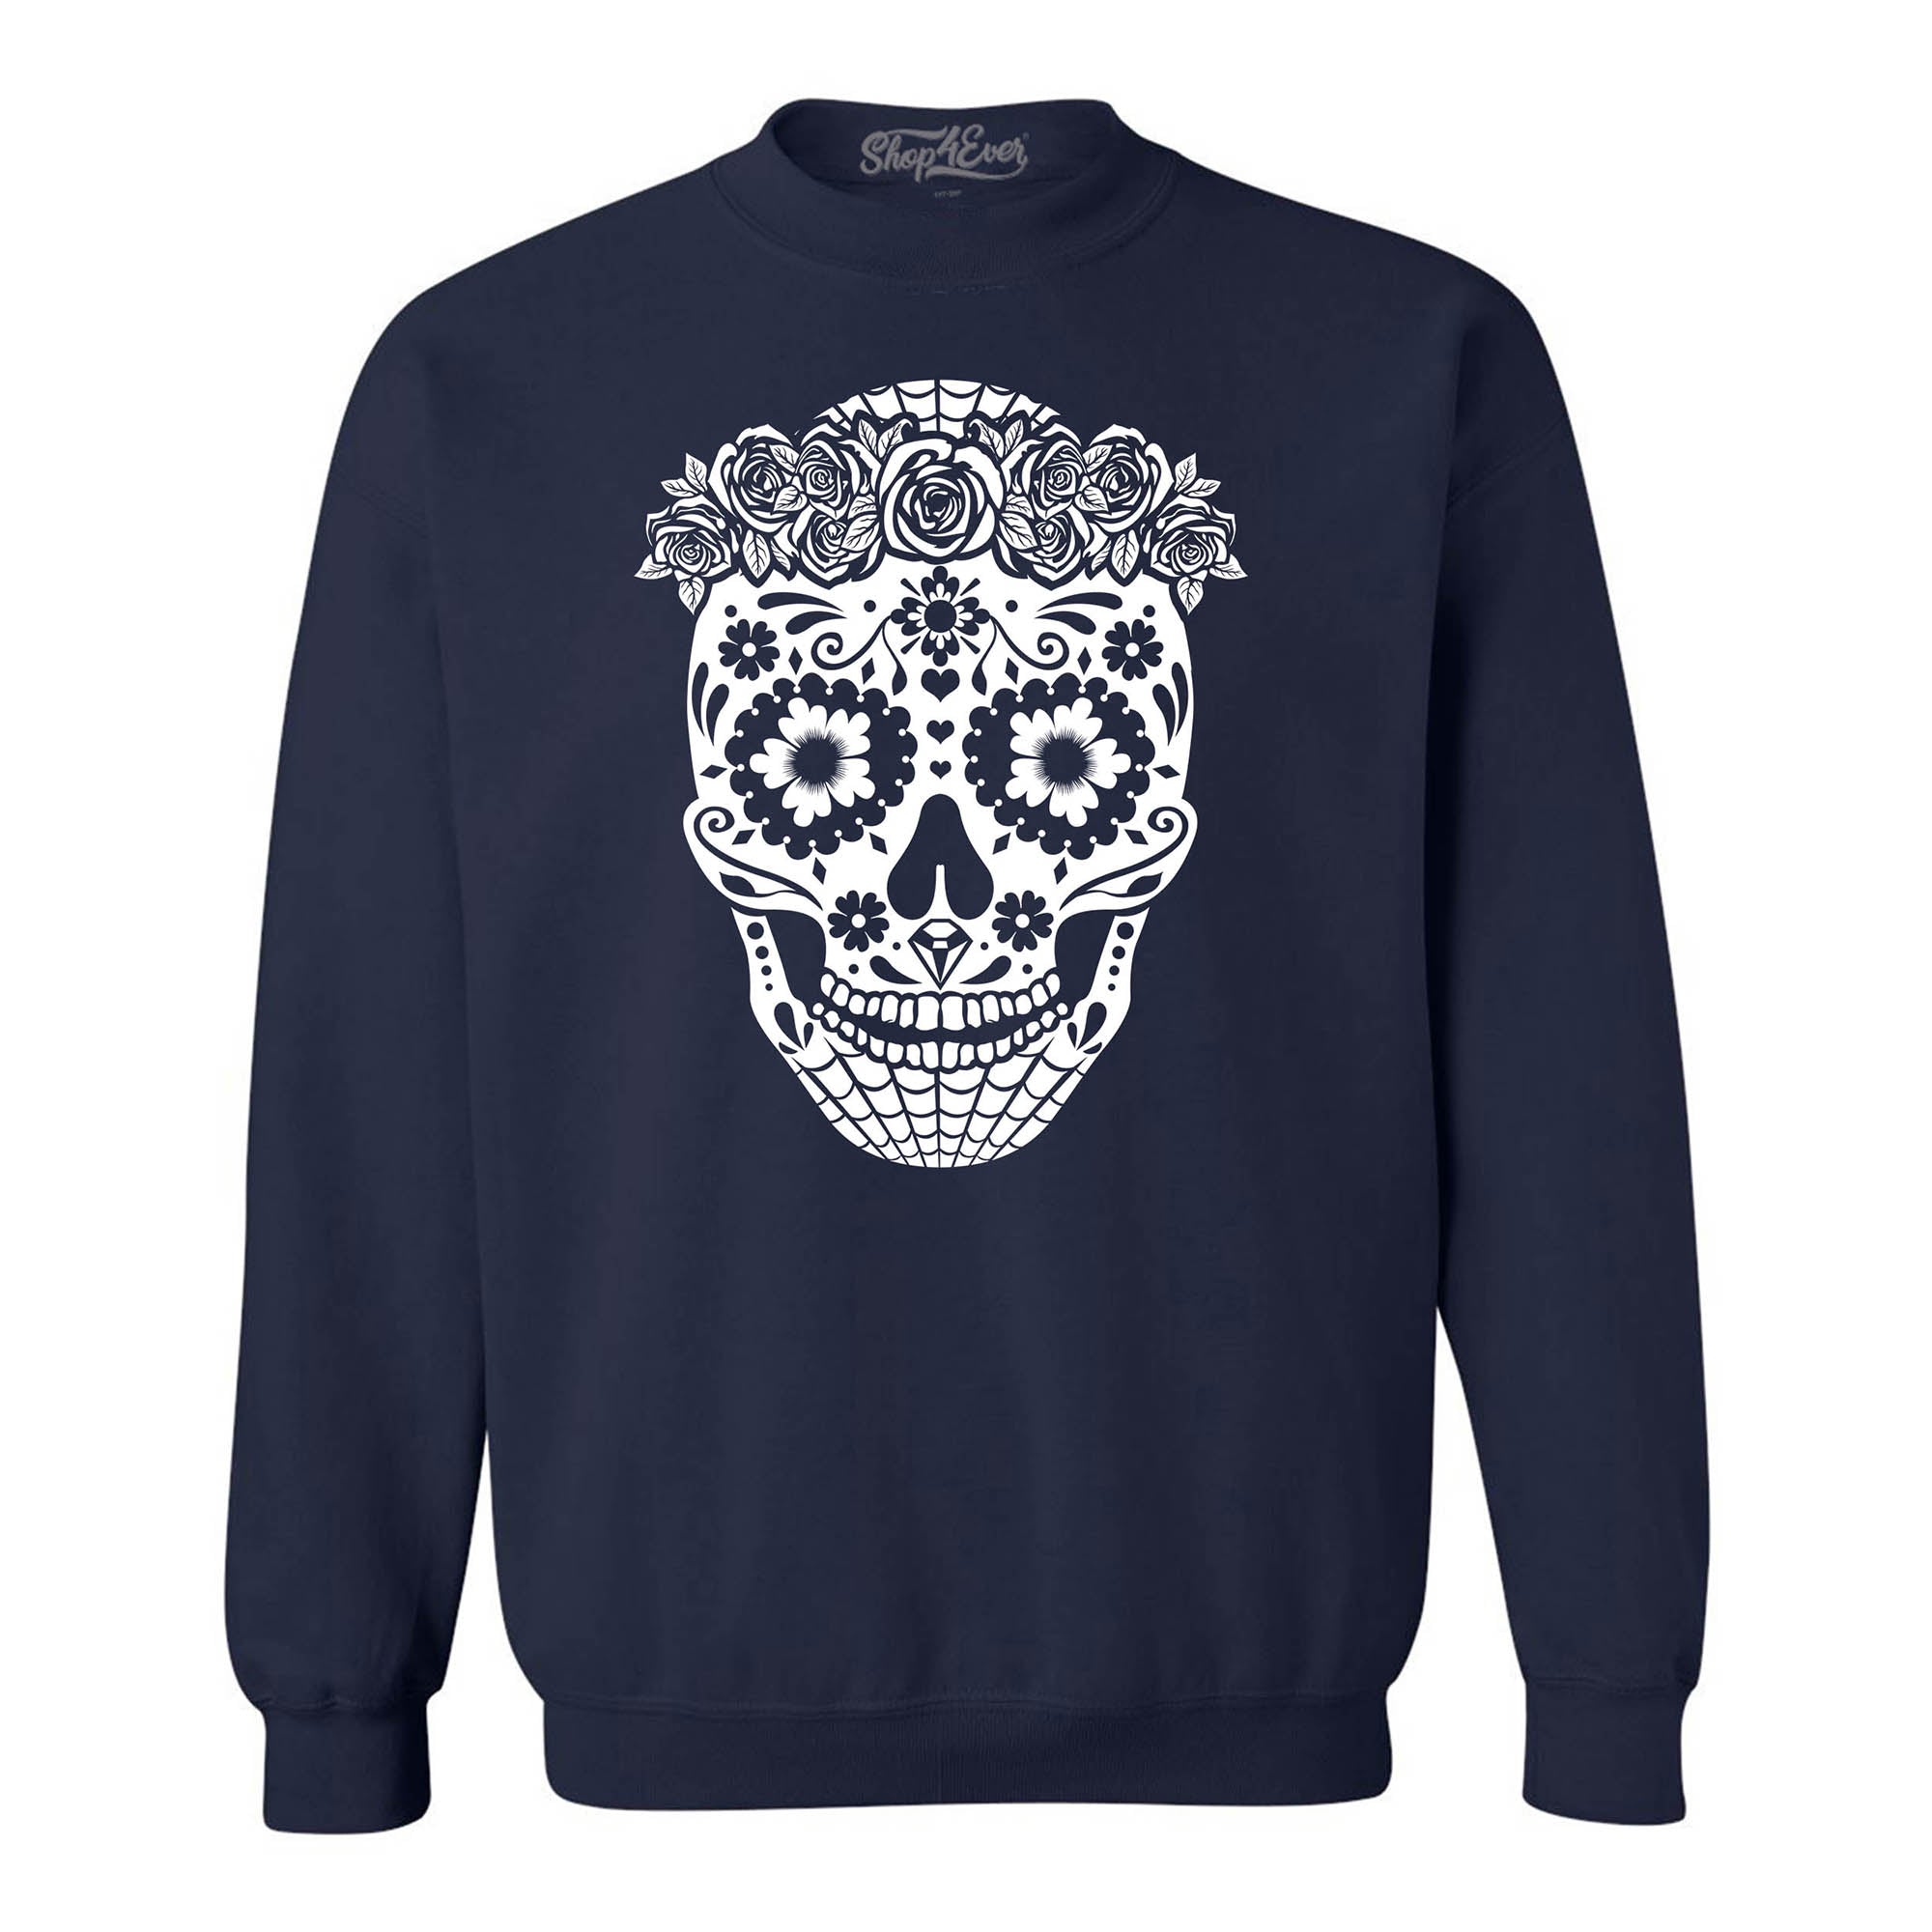 Floral Day of the Dead Girl Skull Crewneck Sweatshirts